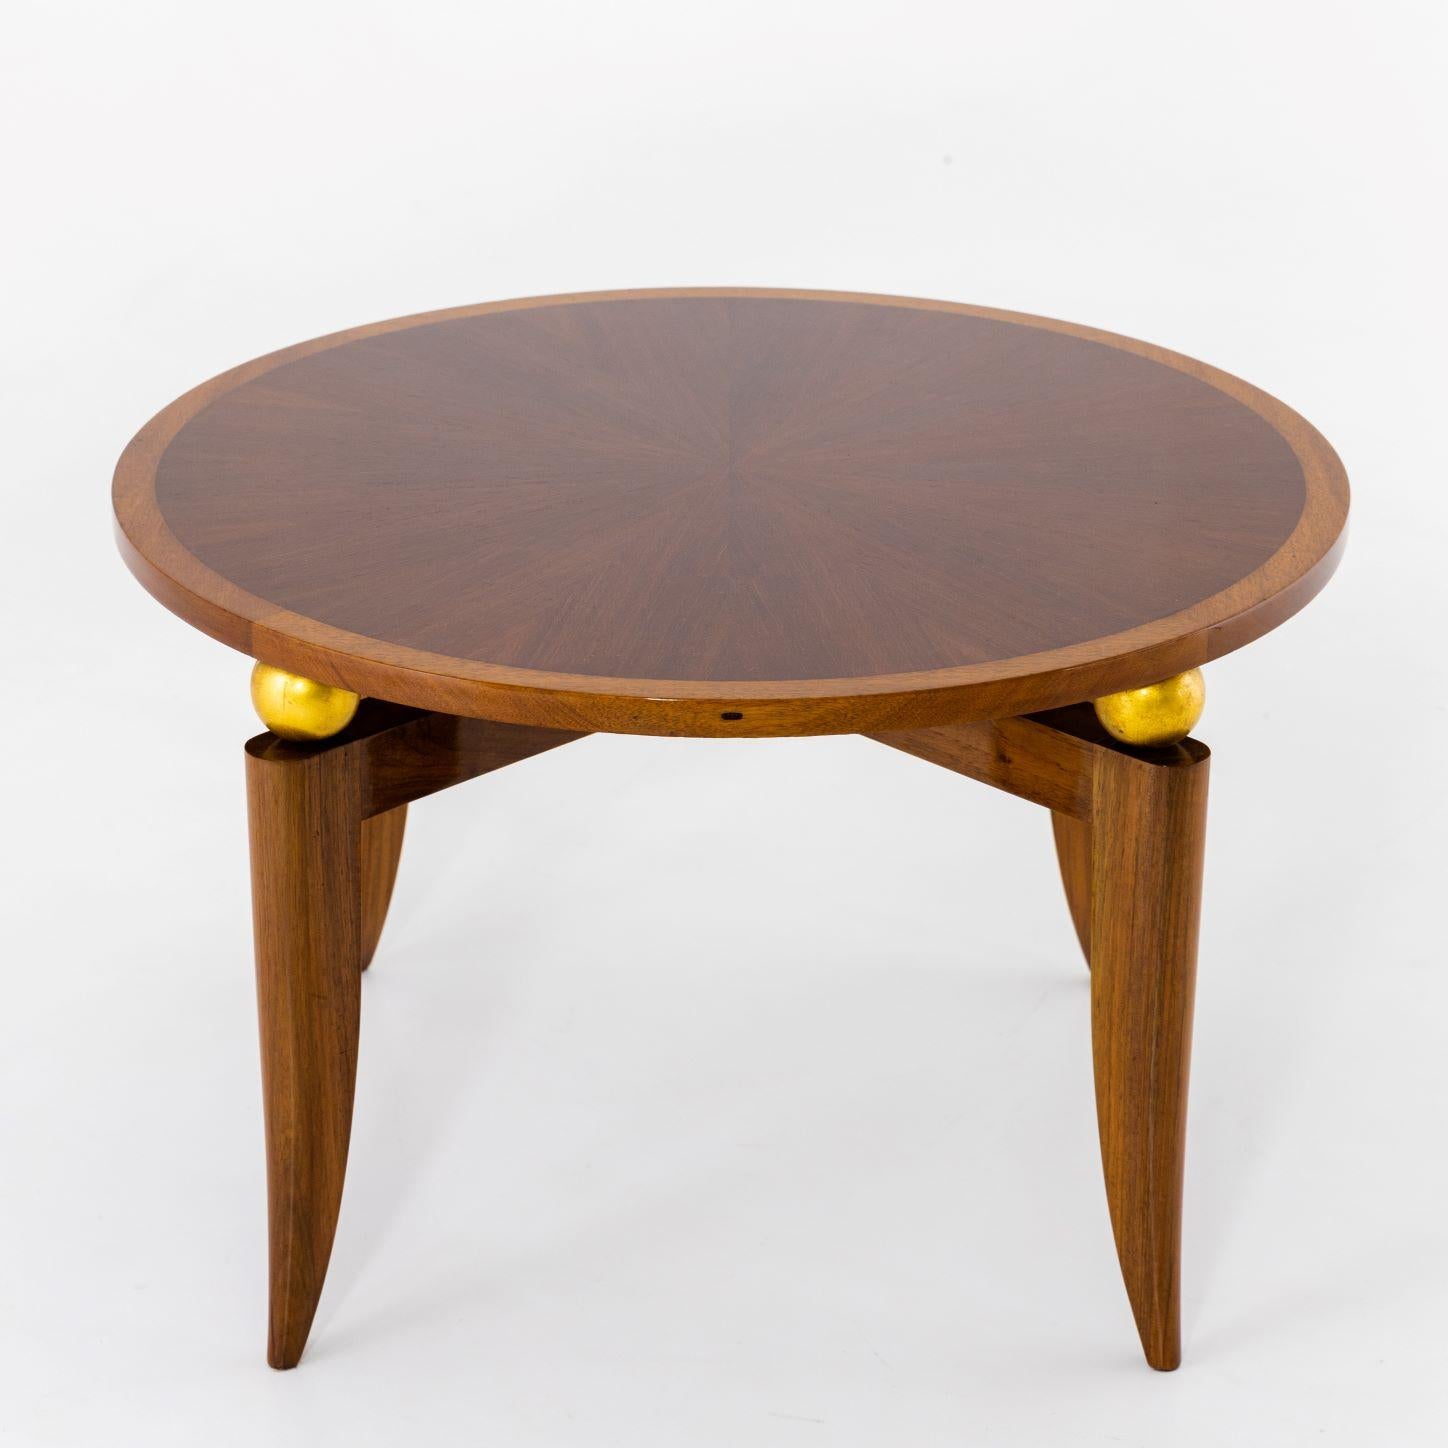 An Art Deco round side table.
Mahogany with gilded details.